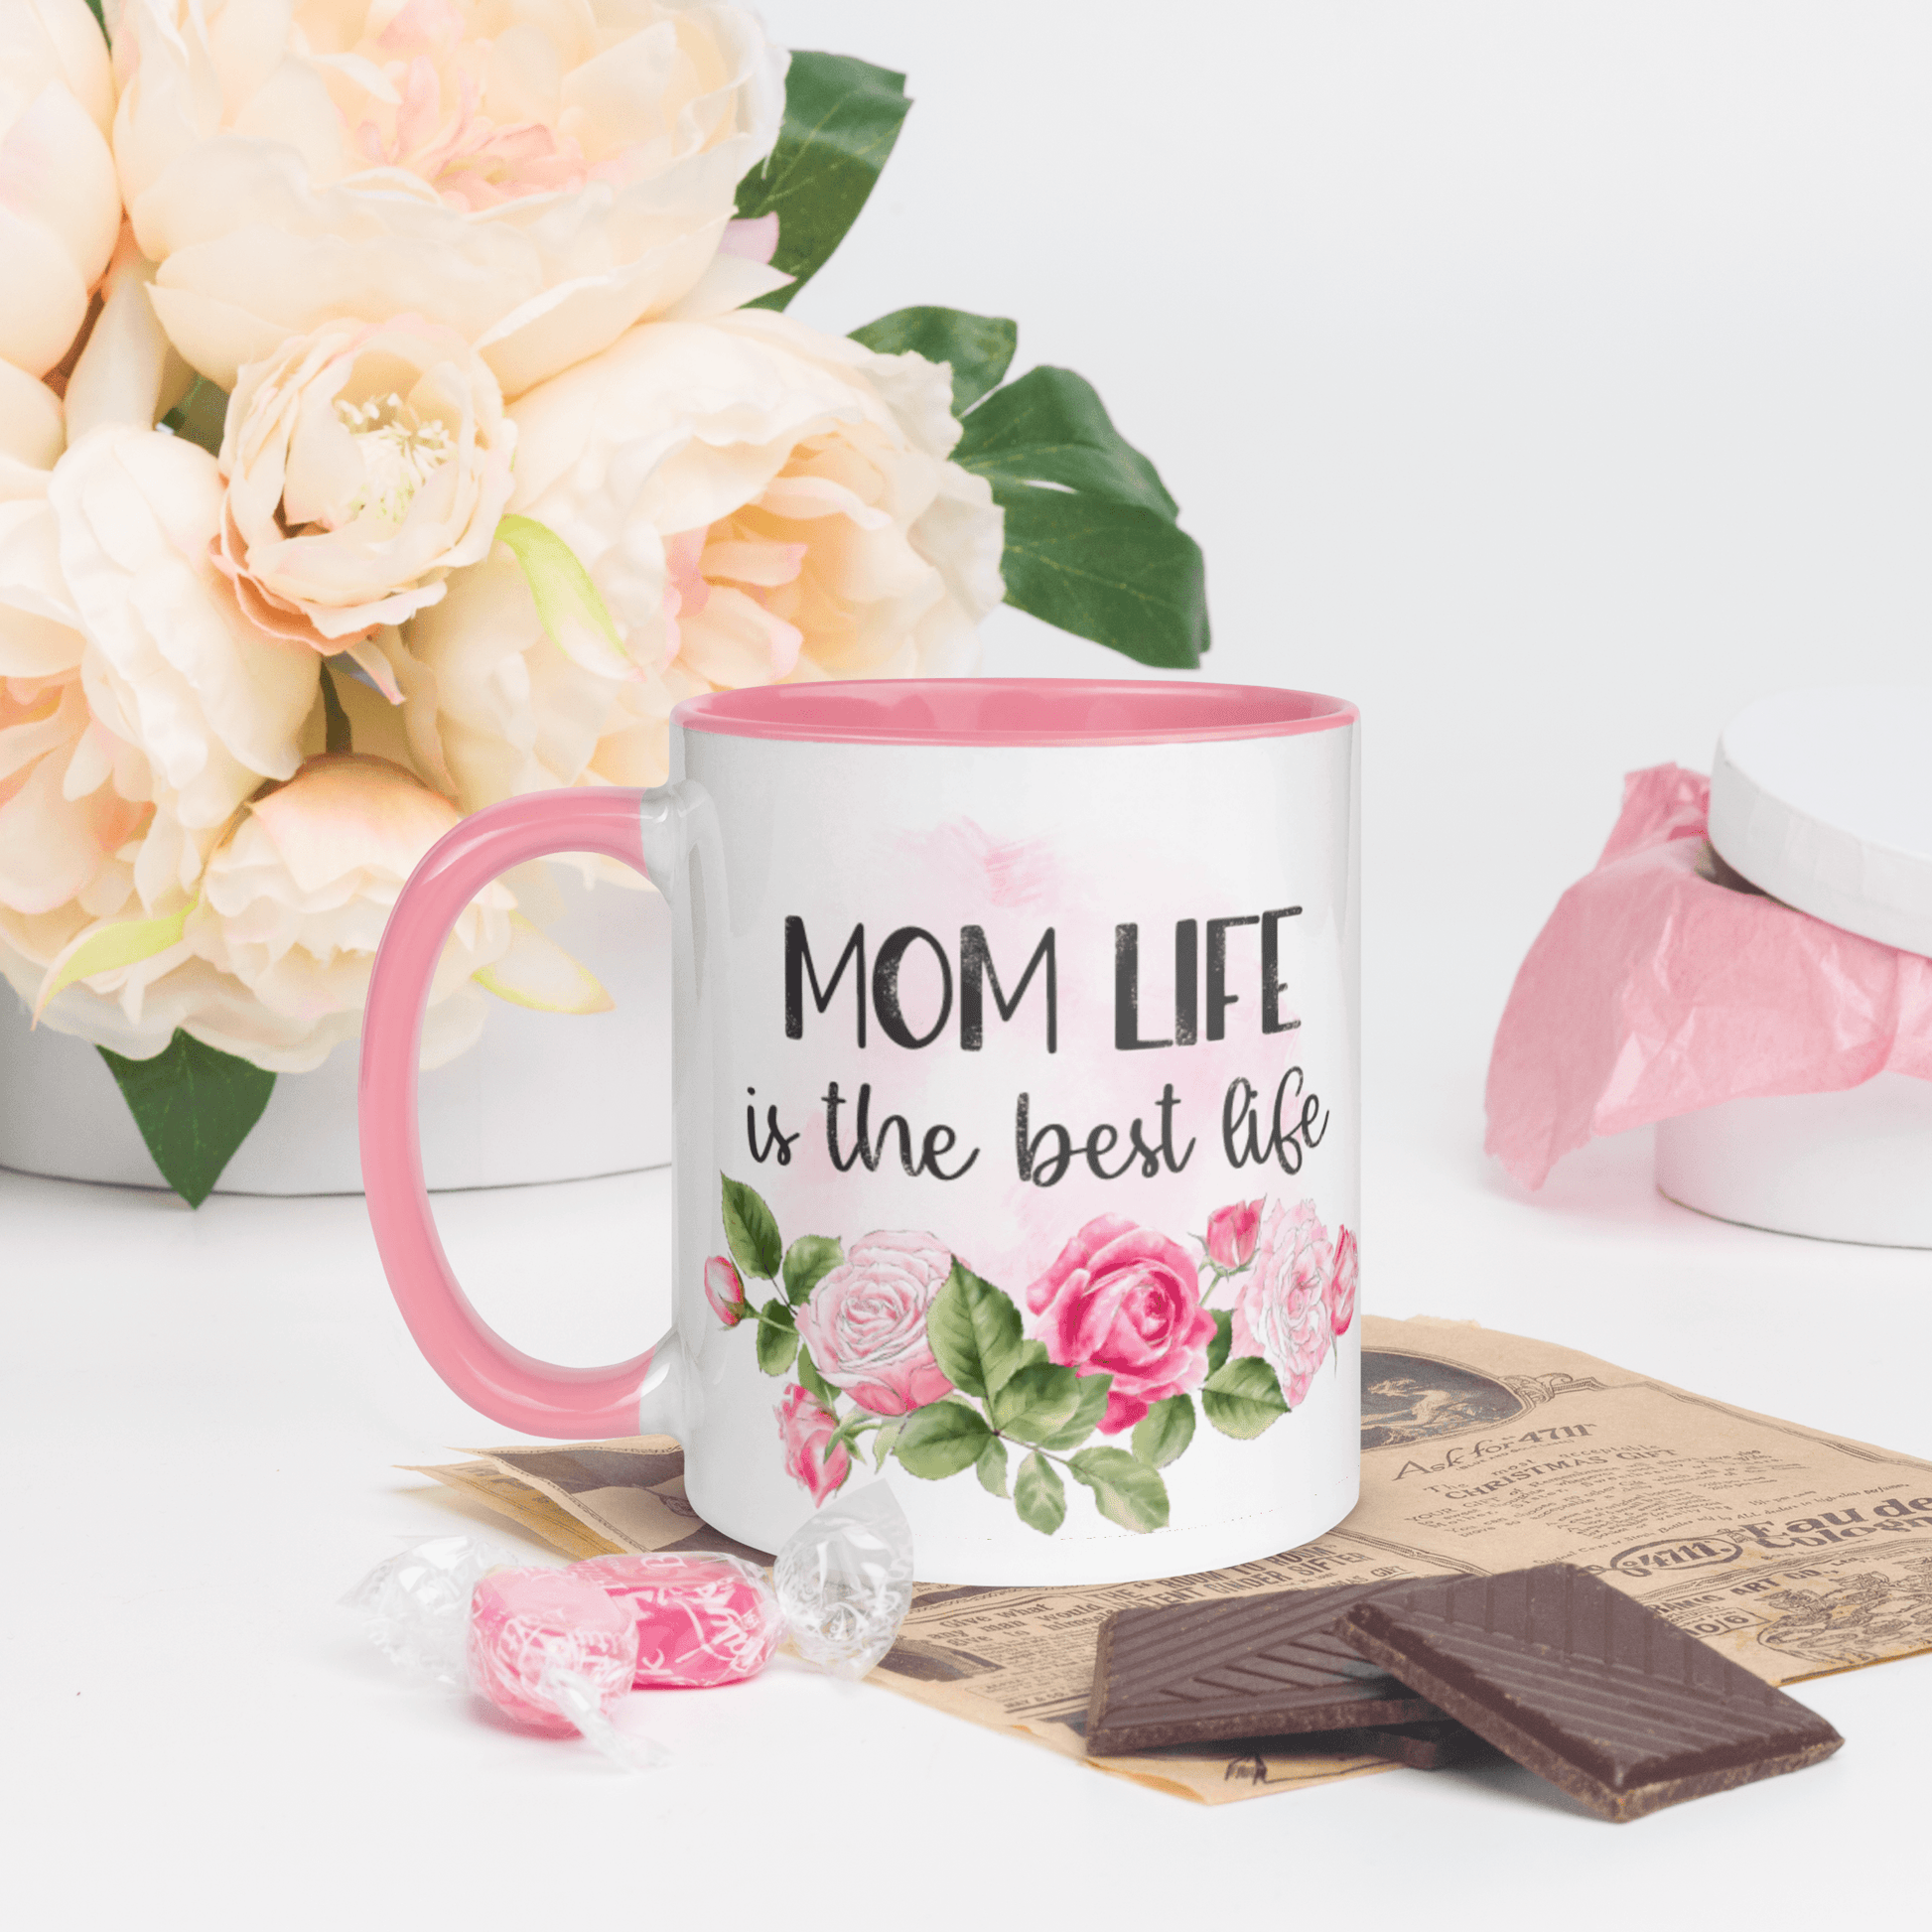 Mom Life is the Best Life ❤️ Ceramic Mug with Color Accent (Available in Various Colors!) - The Grateful Hearts